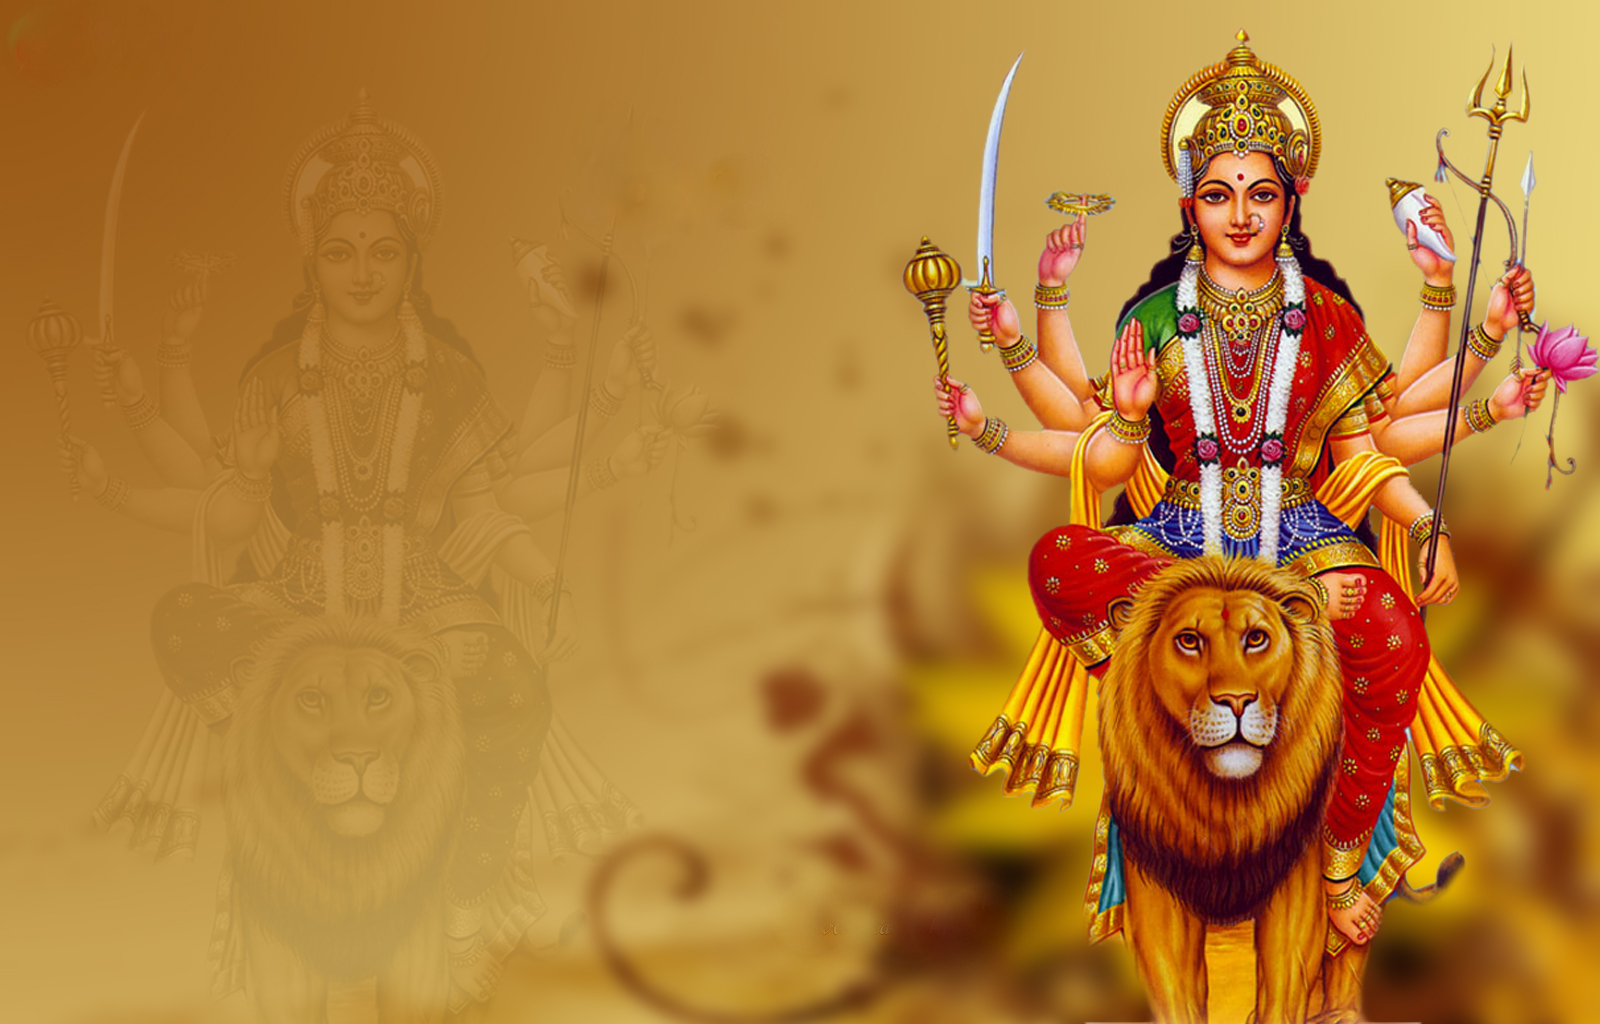 {Adorable} Maa Durga HD Wallpapers, Images and Pictures 